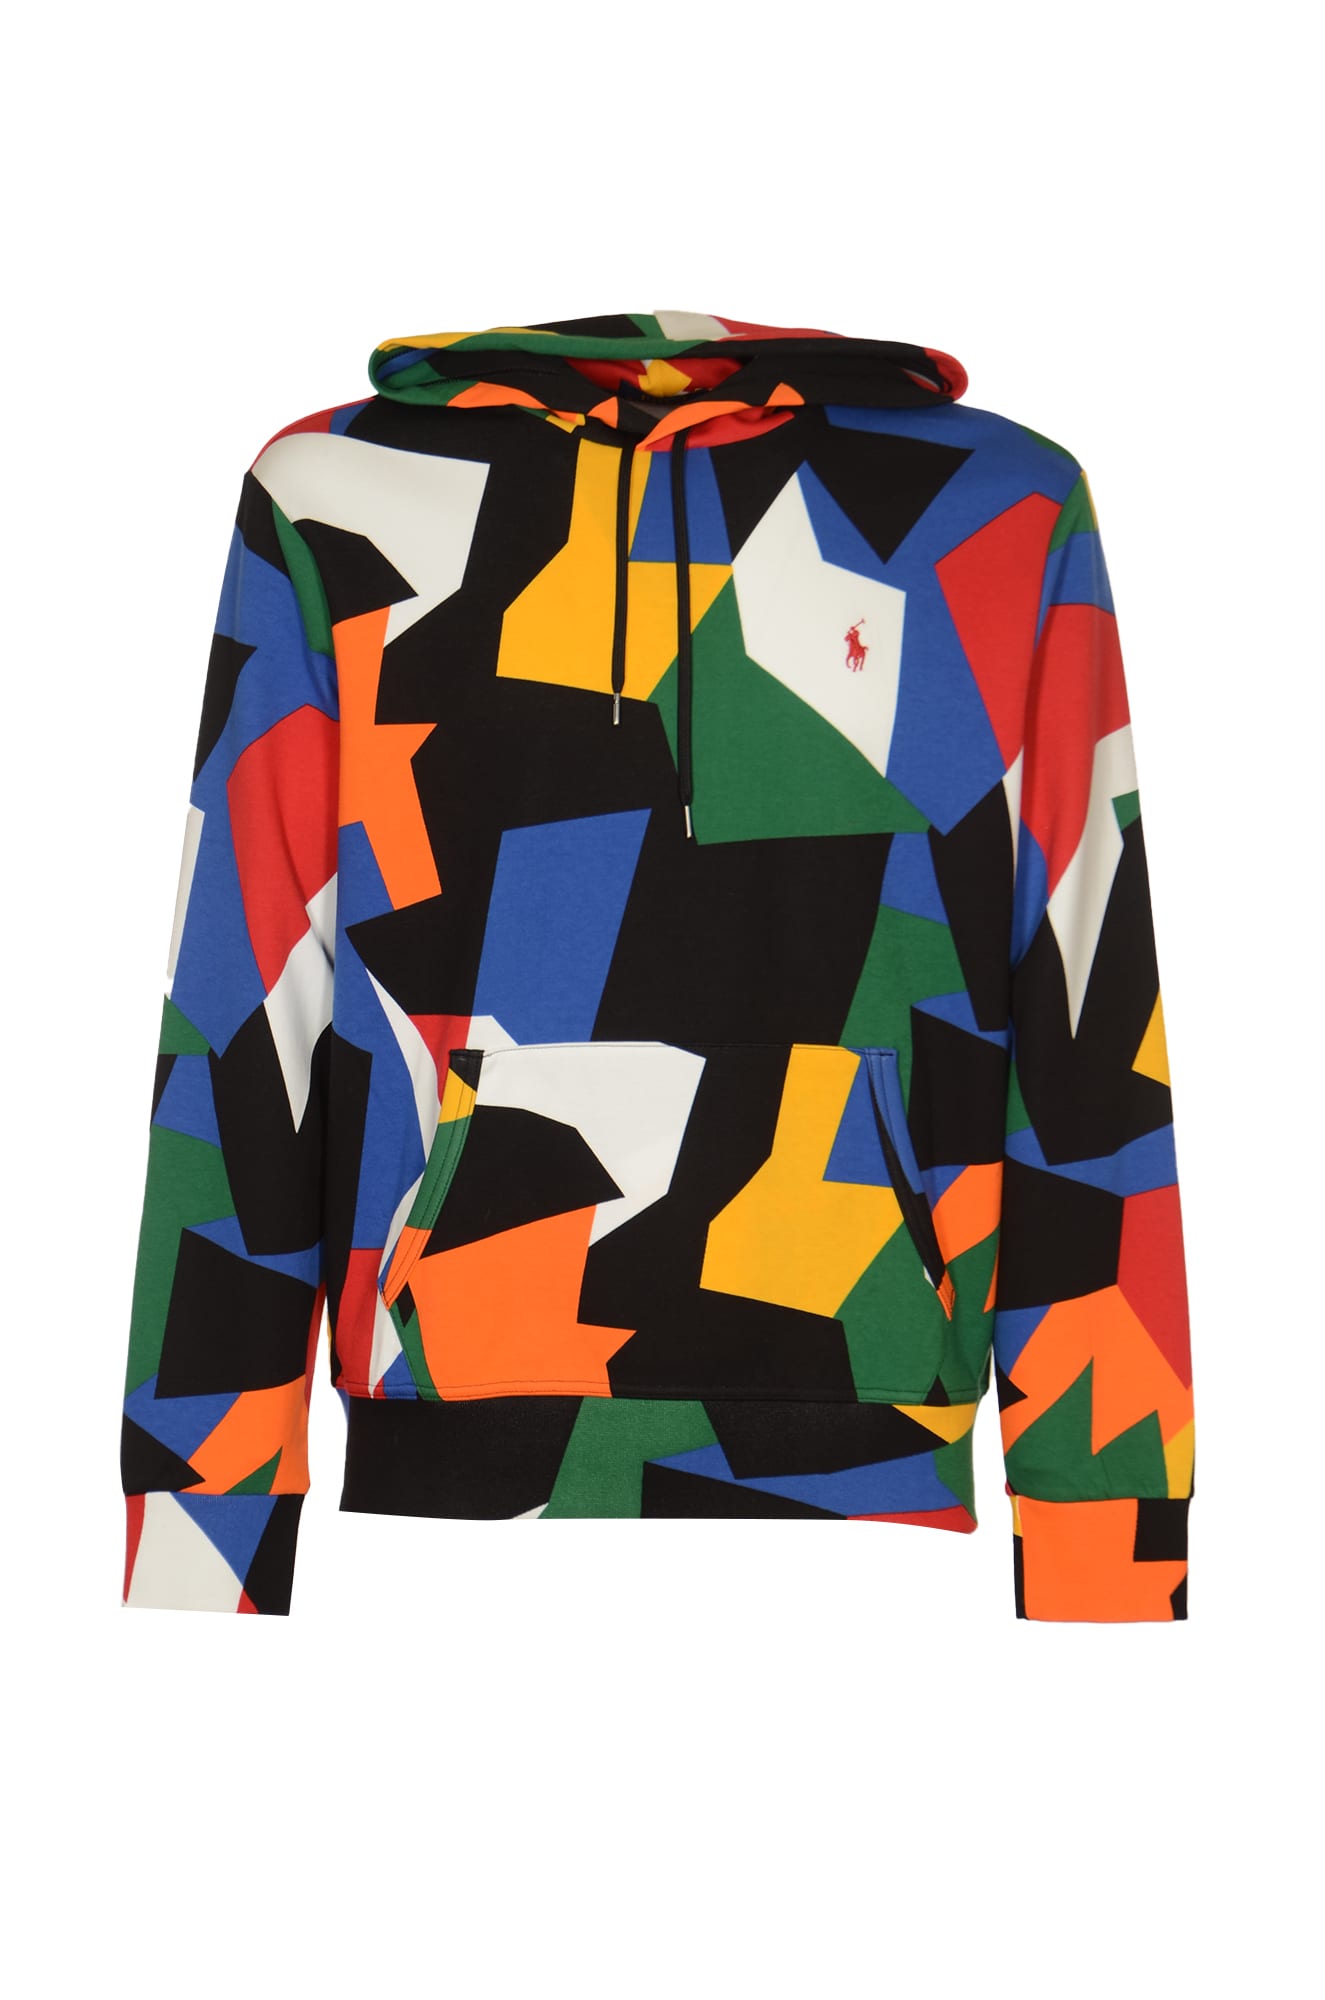 Logo Embroidered Puzzle Patterned Hoodie